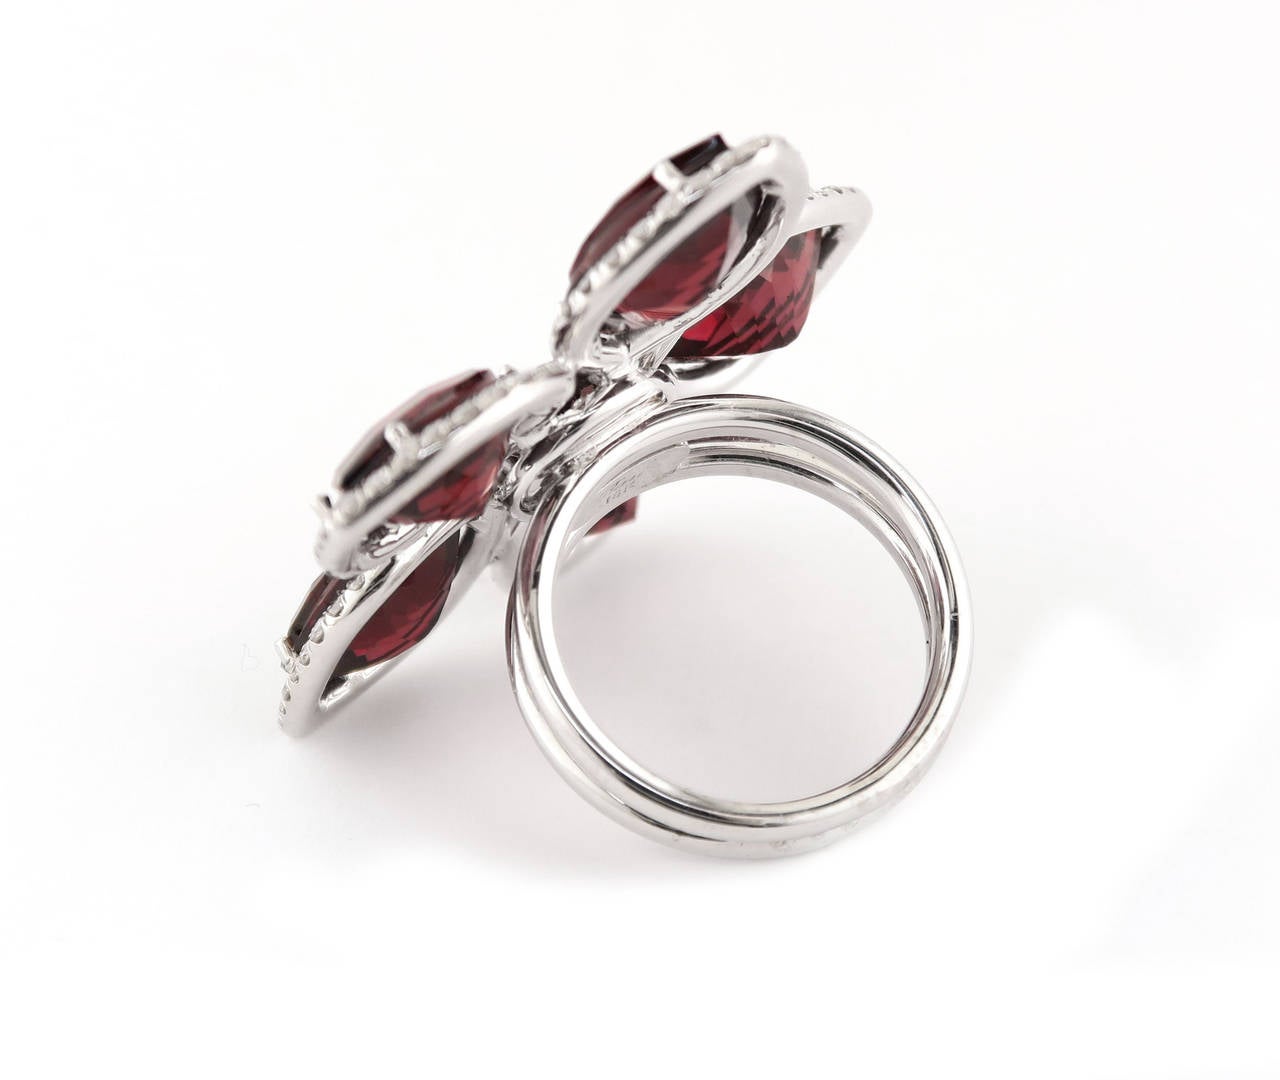 18 Karat White Gold and Garnet Flower Ring, accented with Diamonds. 

The Ancient Egyptians frequently adorned themselves with crowns dazzled with garnet. It was considered to be the single most prized possession of an Egyptian in their afterlife,